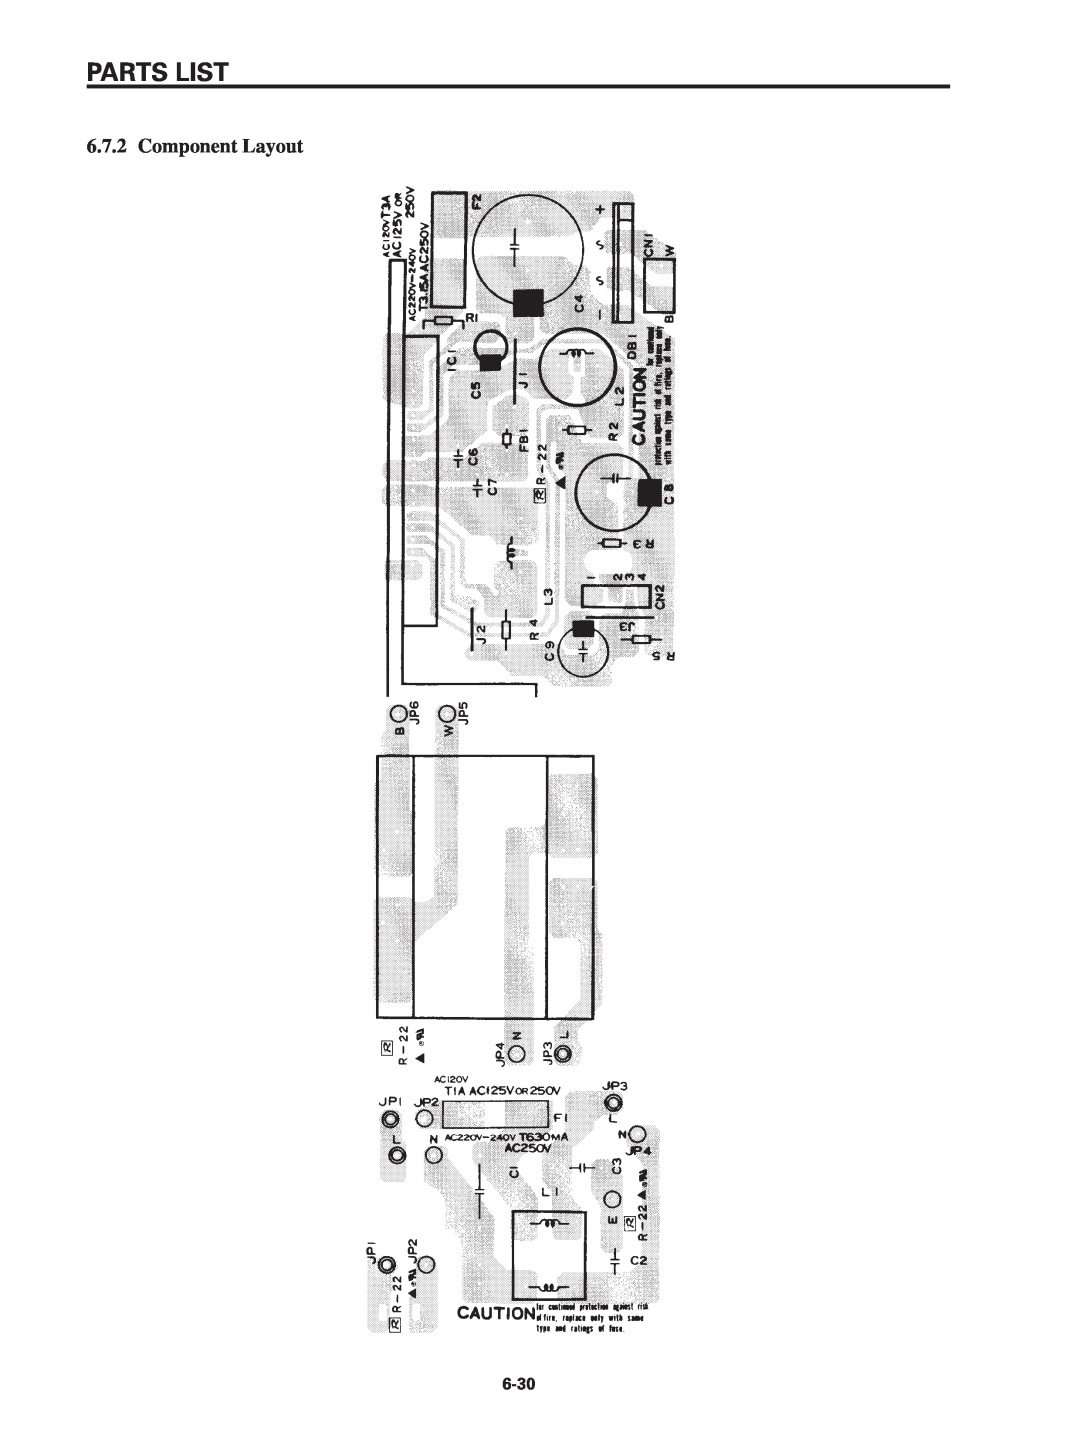 Star Micronics SP320S technical manual Component Layout, Parts List 